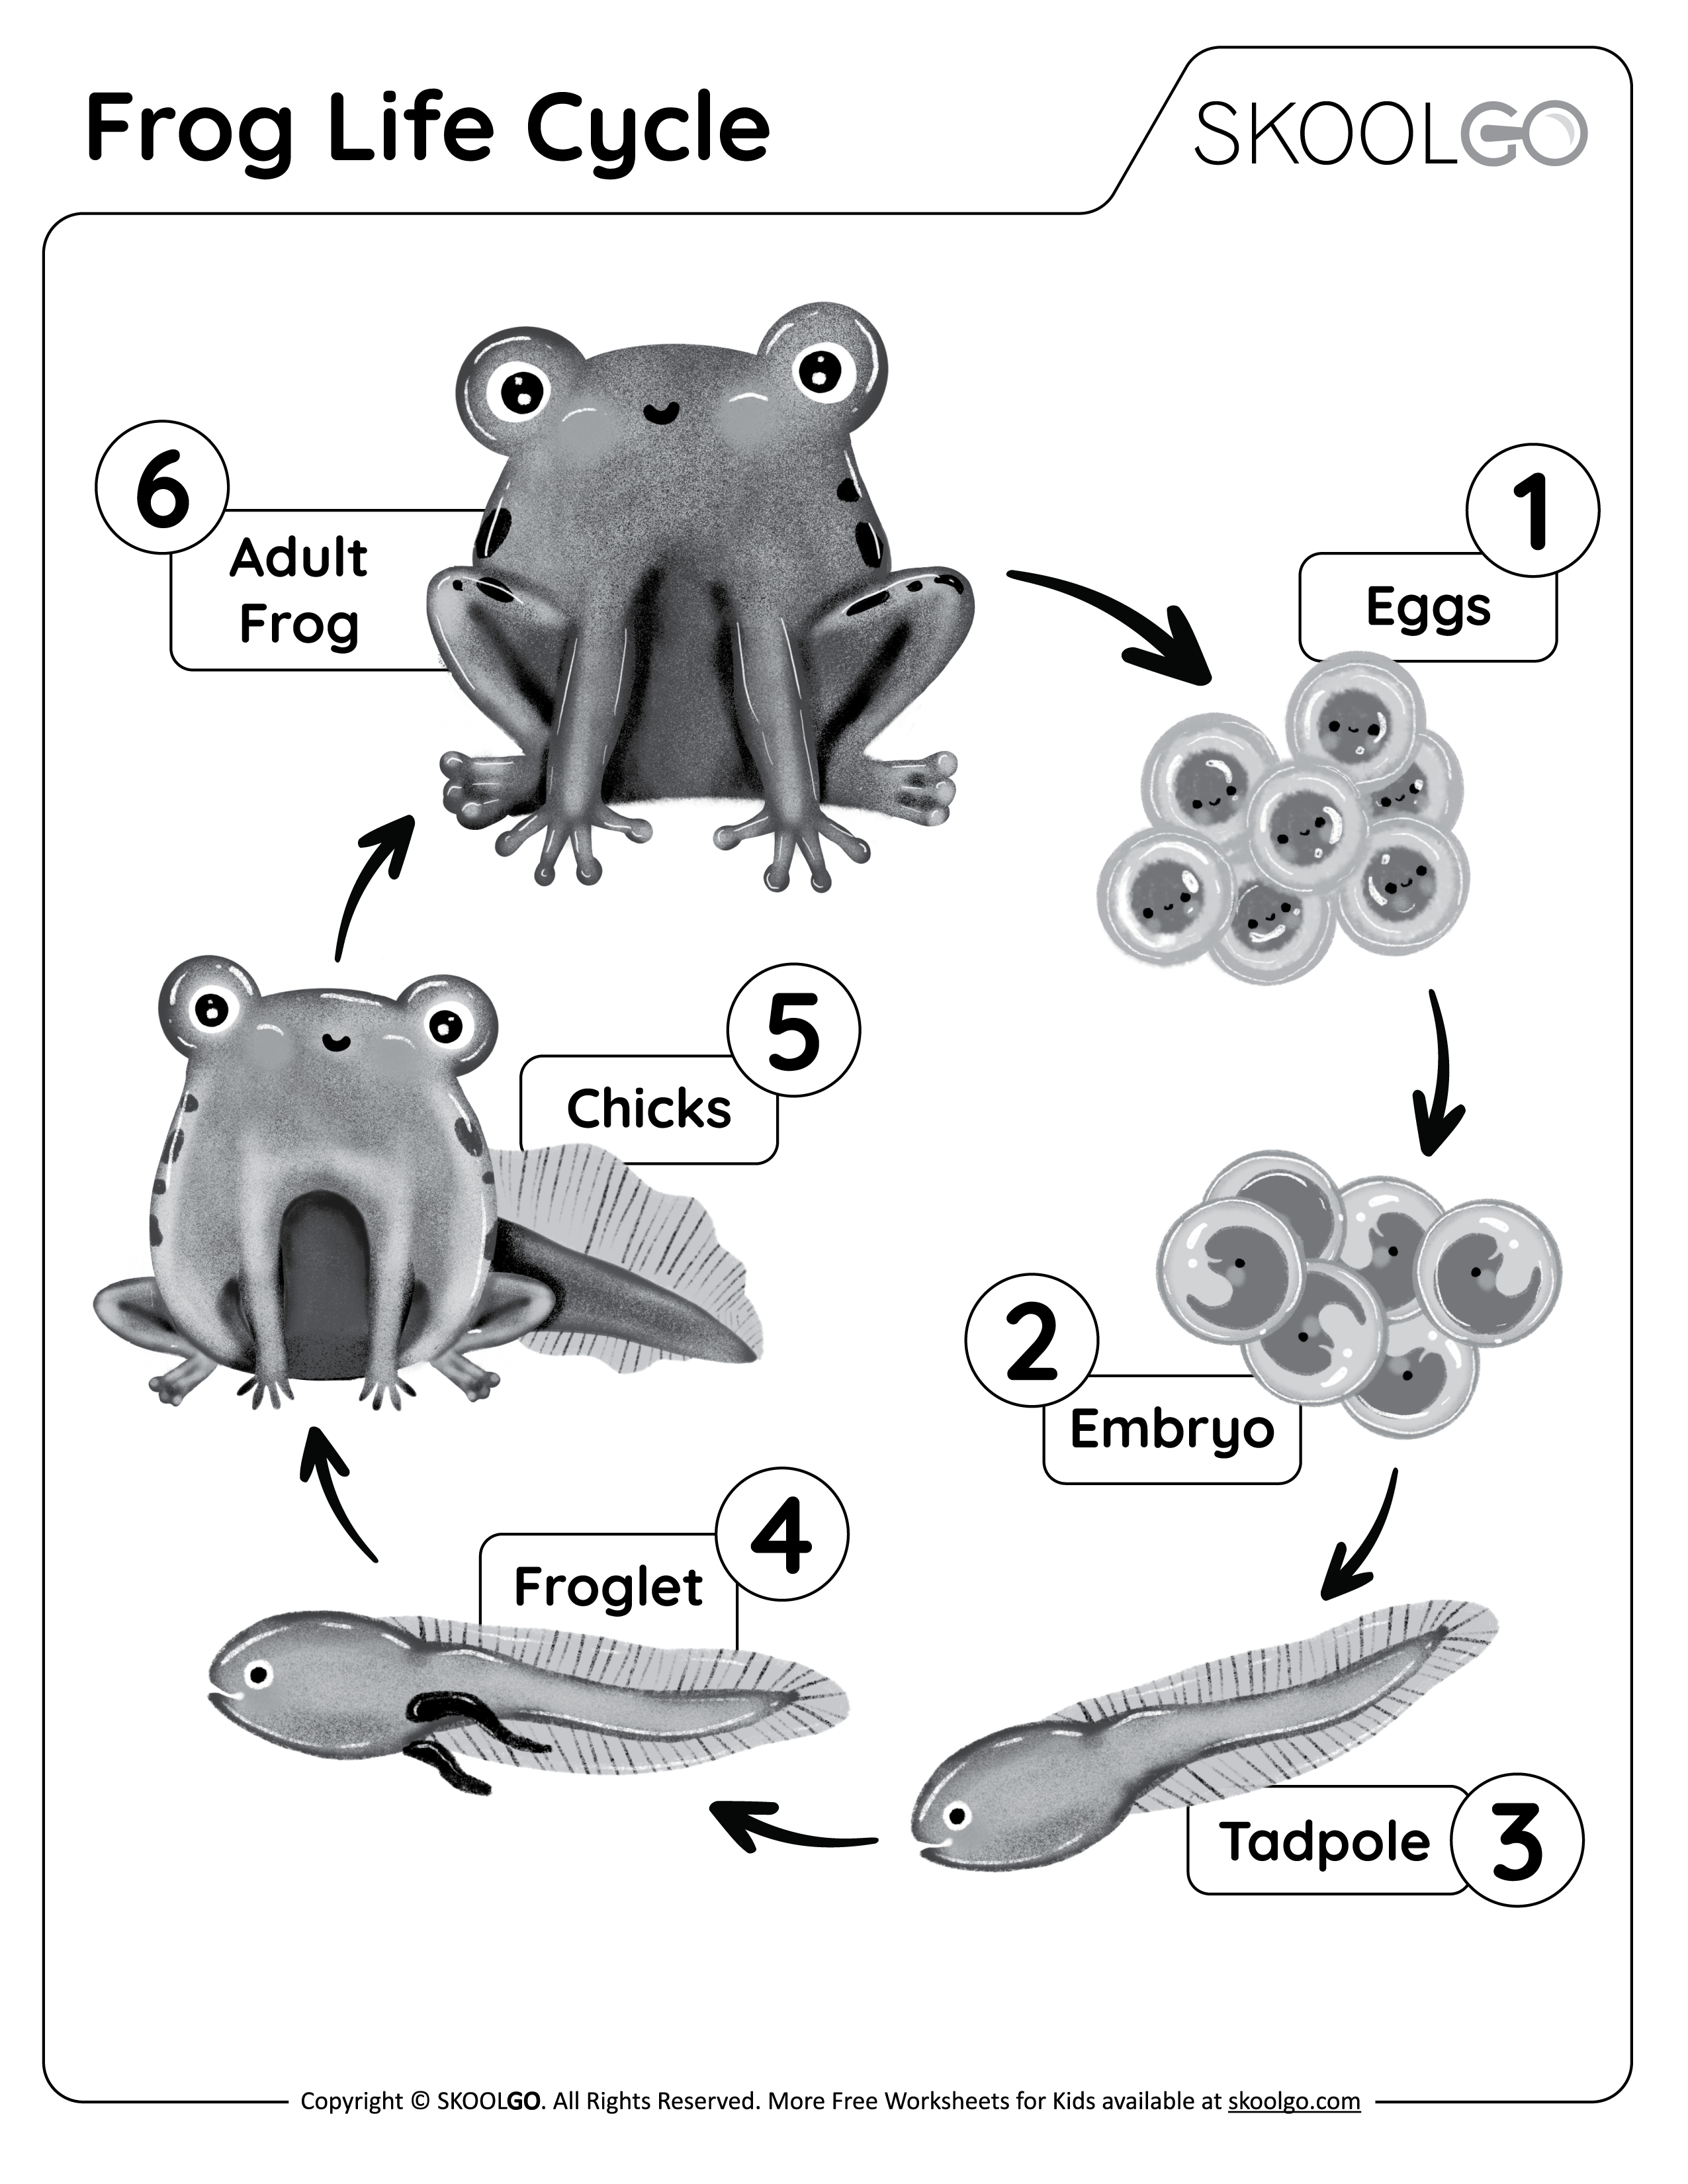 Frog Life Cycle - Free Black and White Worksheet for Kids